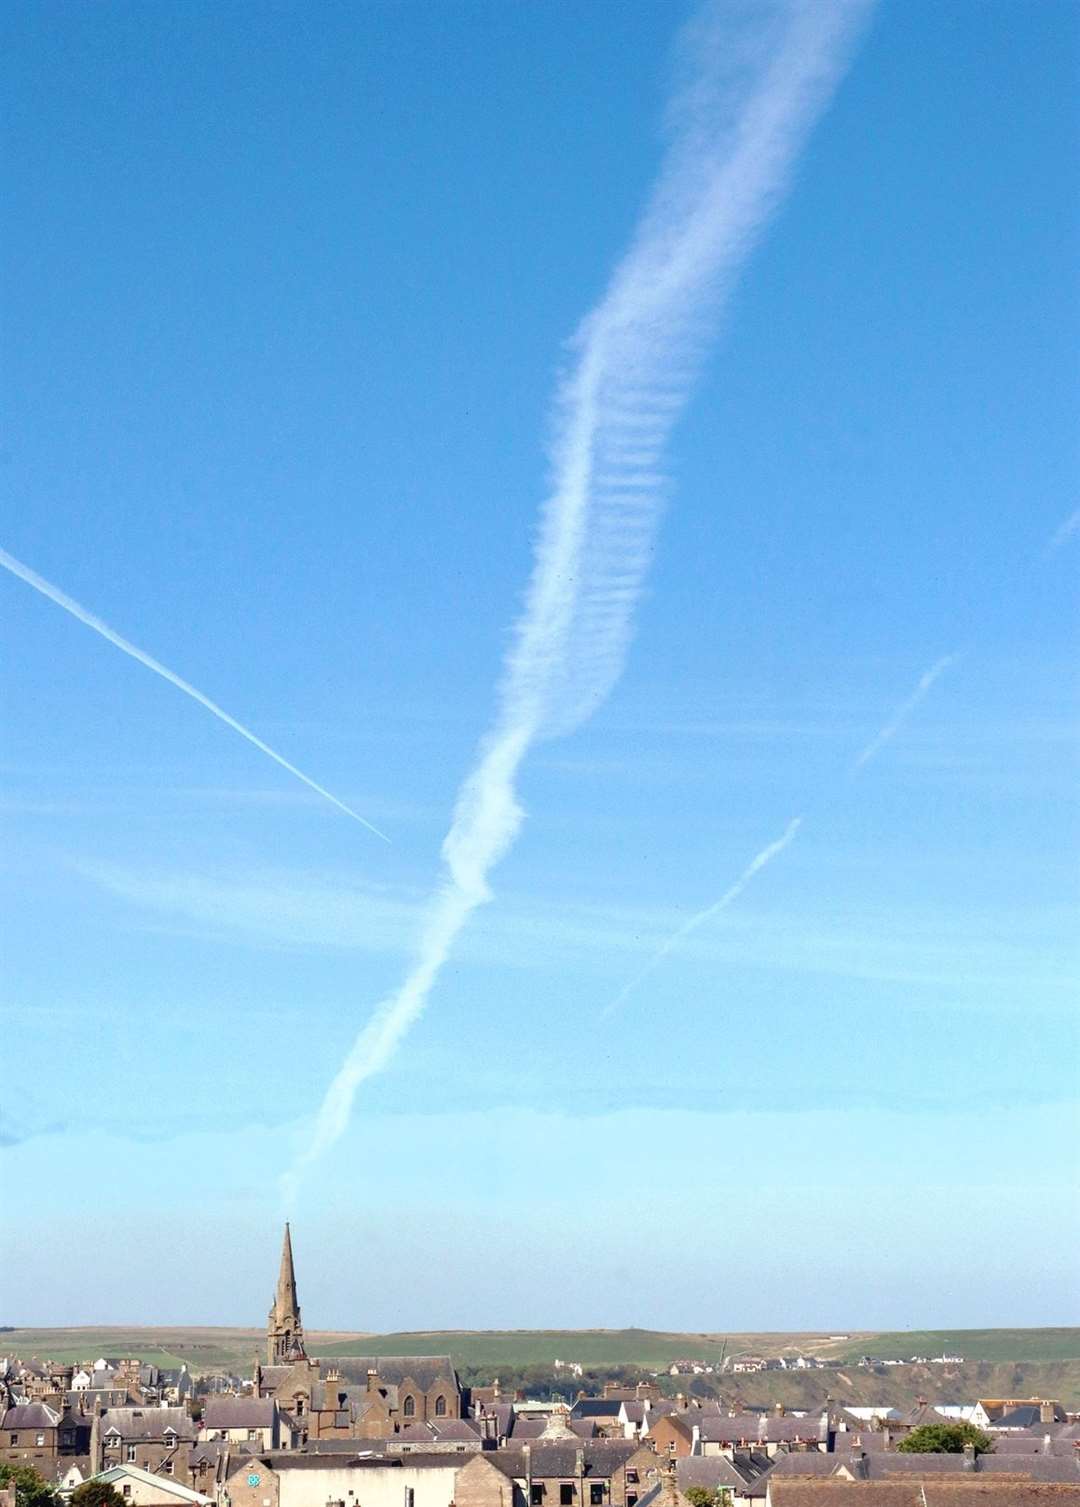 The shot Alan McIvor took from his window seems to show a jet trail or cloud formation emanating from the spire of the church in Olrig Street.